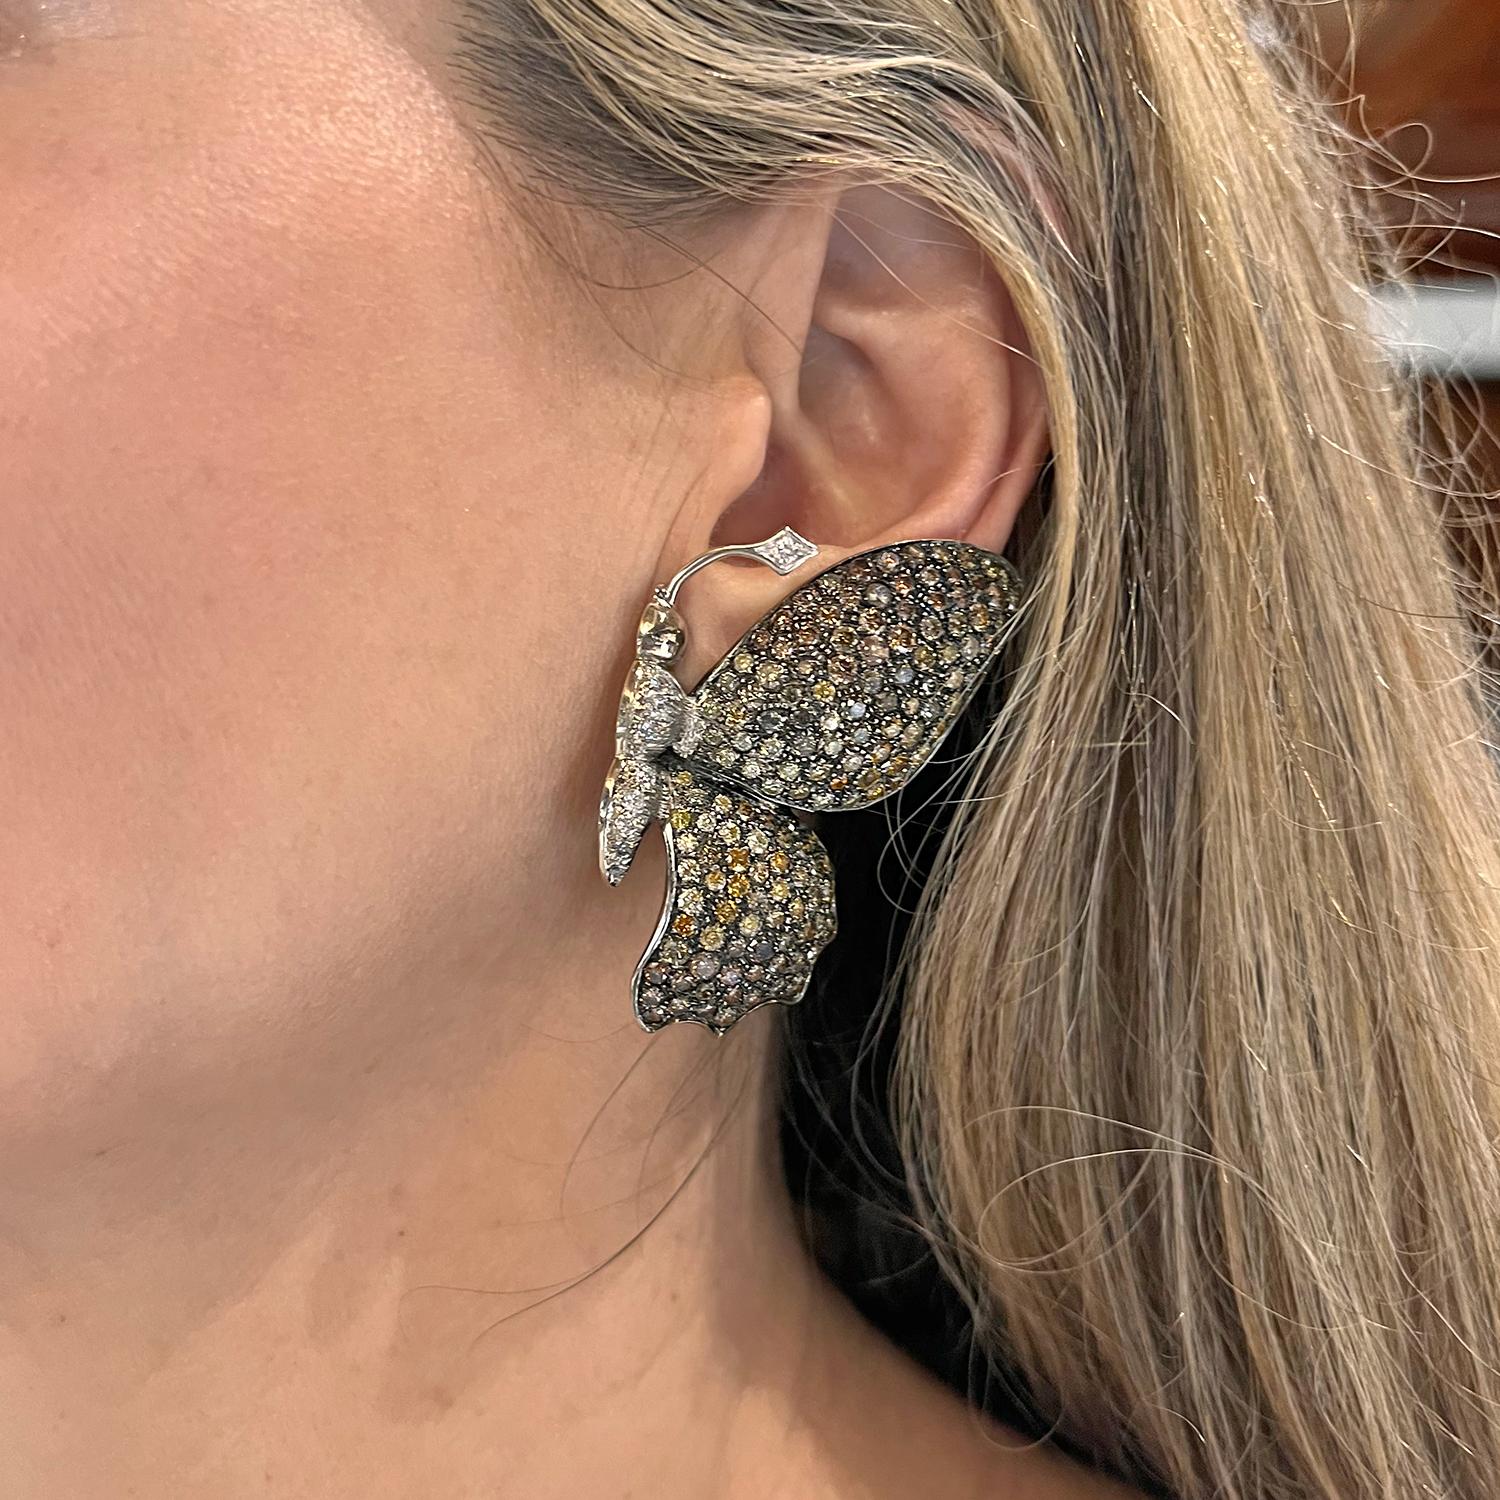 Butterfly earrings in black oxidized and polished 18k white gold, the body and antennae set with round brilliant-cut white diamonds and wings set with various-sized round brilliant-cut yellow, orange, olive, brown and champagne-colored diamonds. 